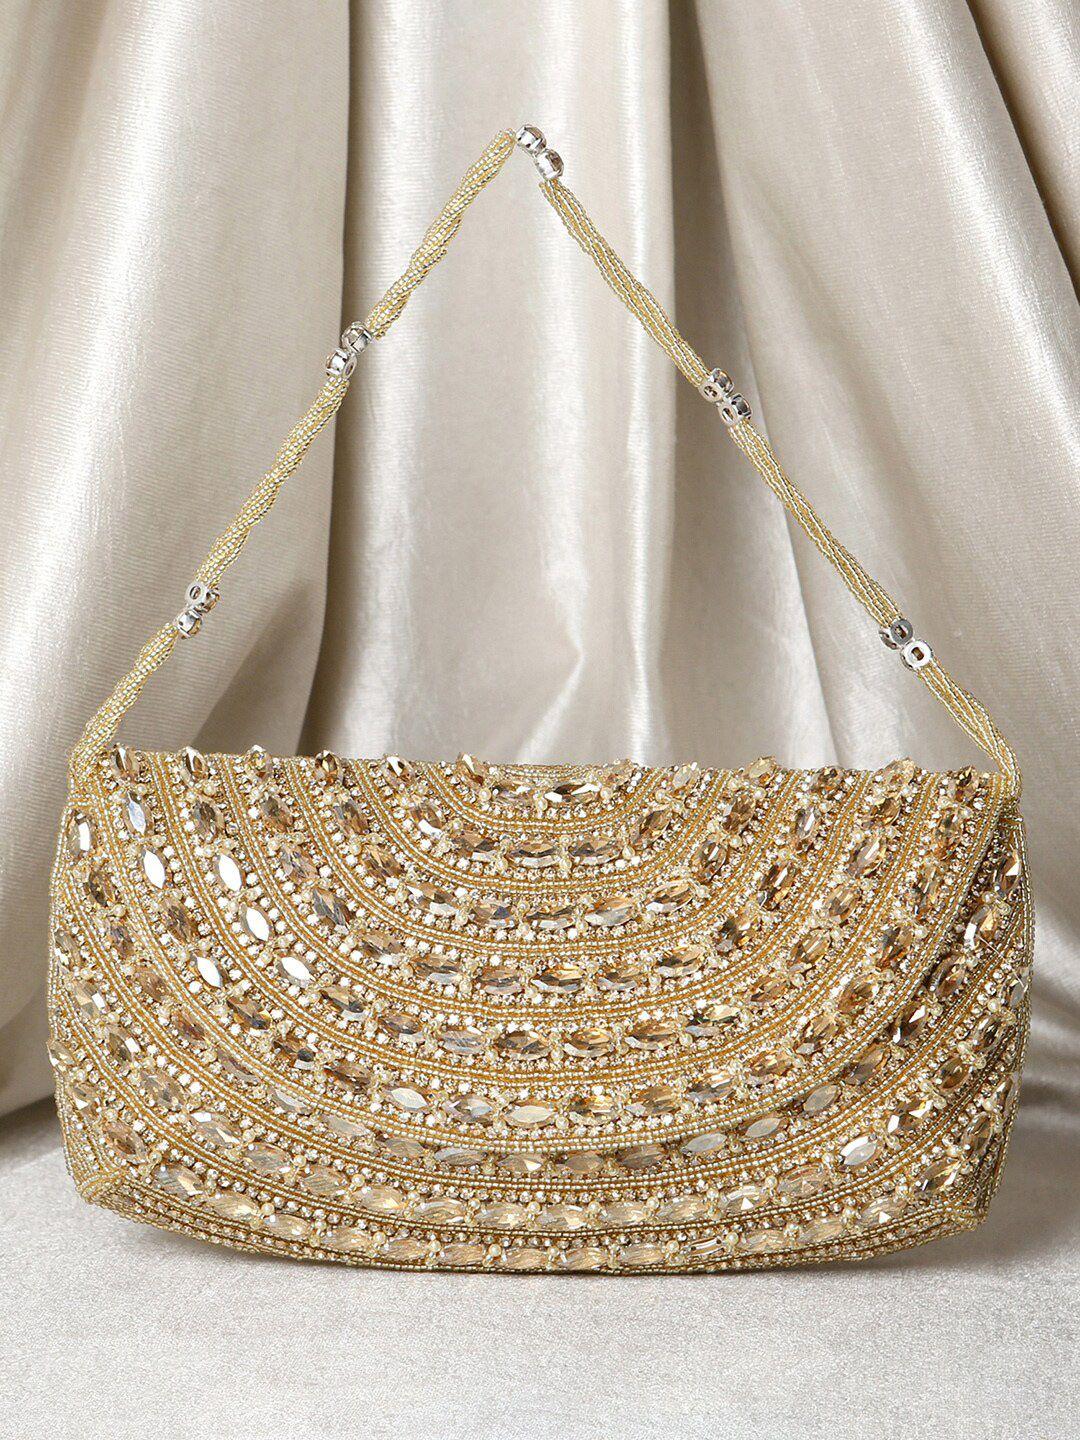 peora women gold-toned embellished purse clutch